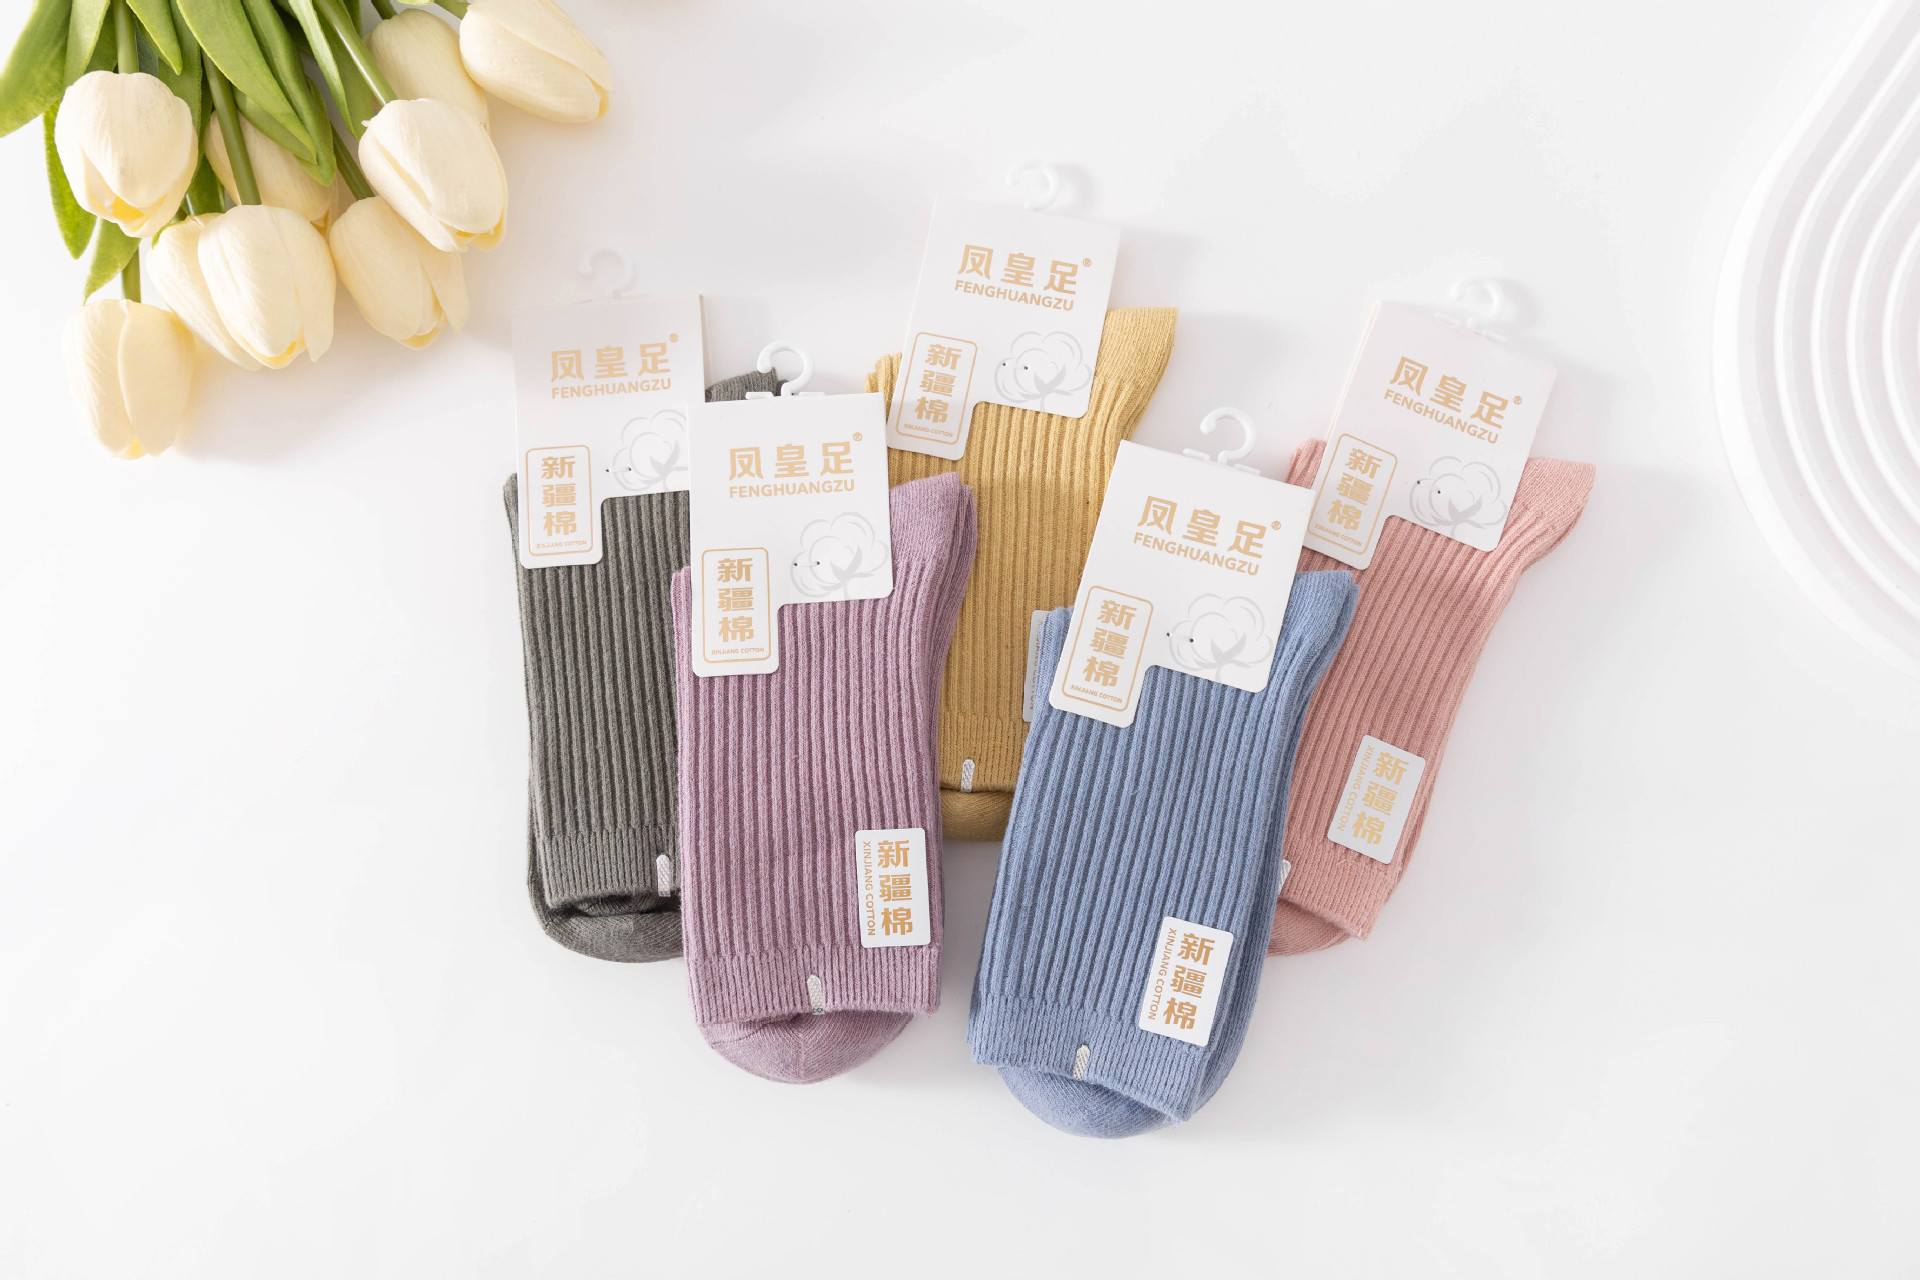 Socks Pure Cotton Men's Double-Stitched Socks Women's Socks Xinjiang Mid-Calf Length Solid Color Lace Combed Cotton Socks One Piece Dropshipping Street Vendor Stocks